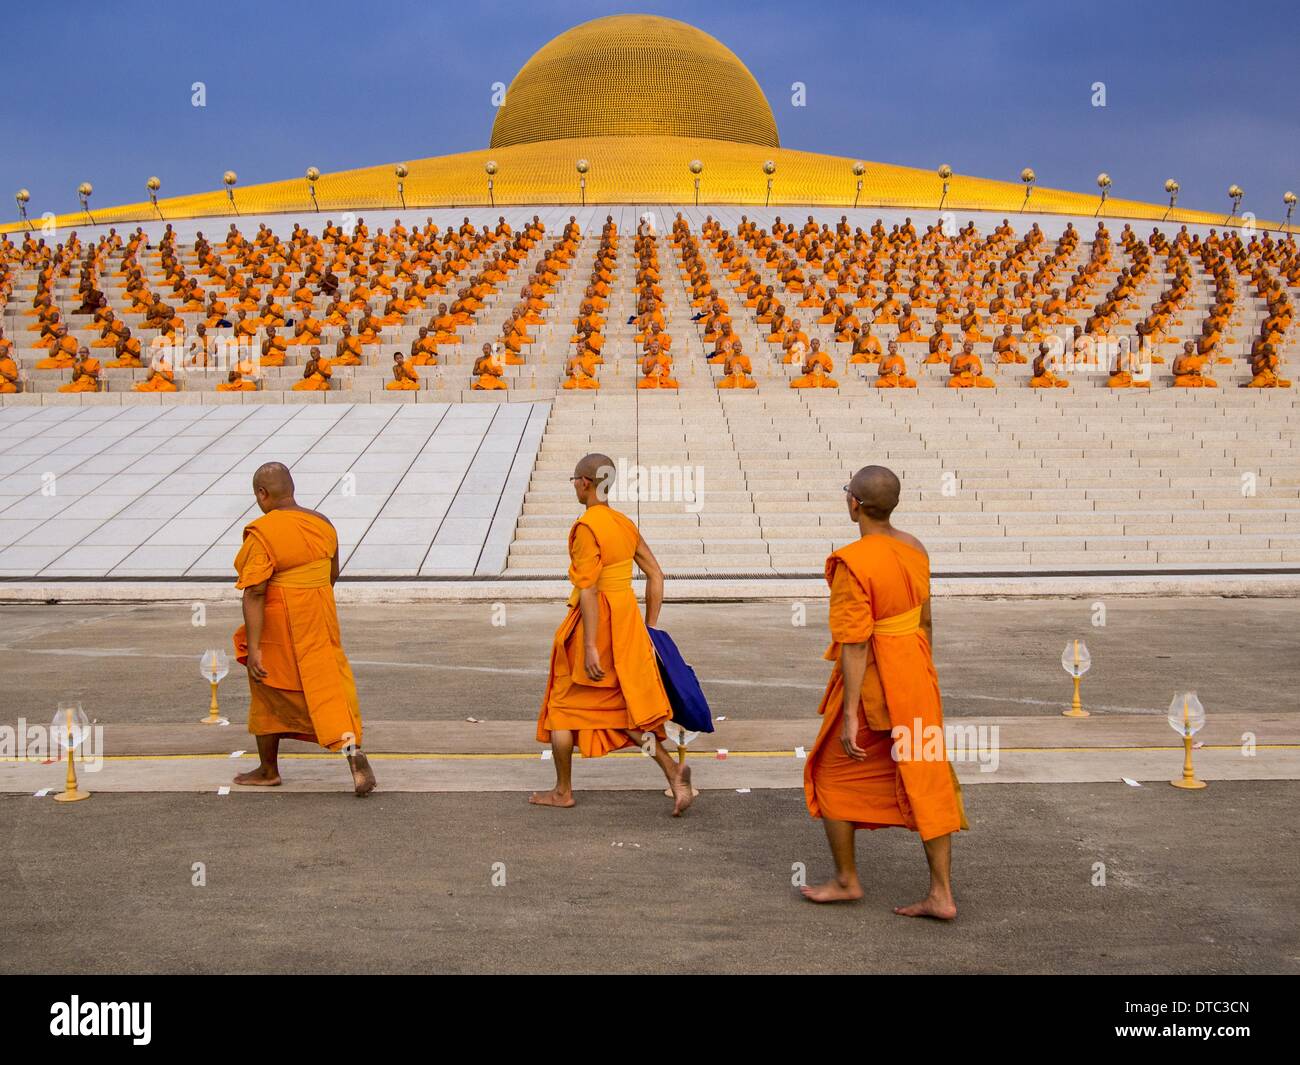 Khlong Luang Pathum Thani Thailand 14th Feb 14 Monks File Into The Main Prayer Area At Wat Phra Dhammakaya For Makha Bucha Day The Aims Of Makha Bucha Day Are Not To